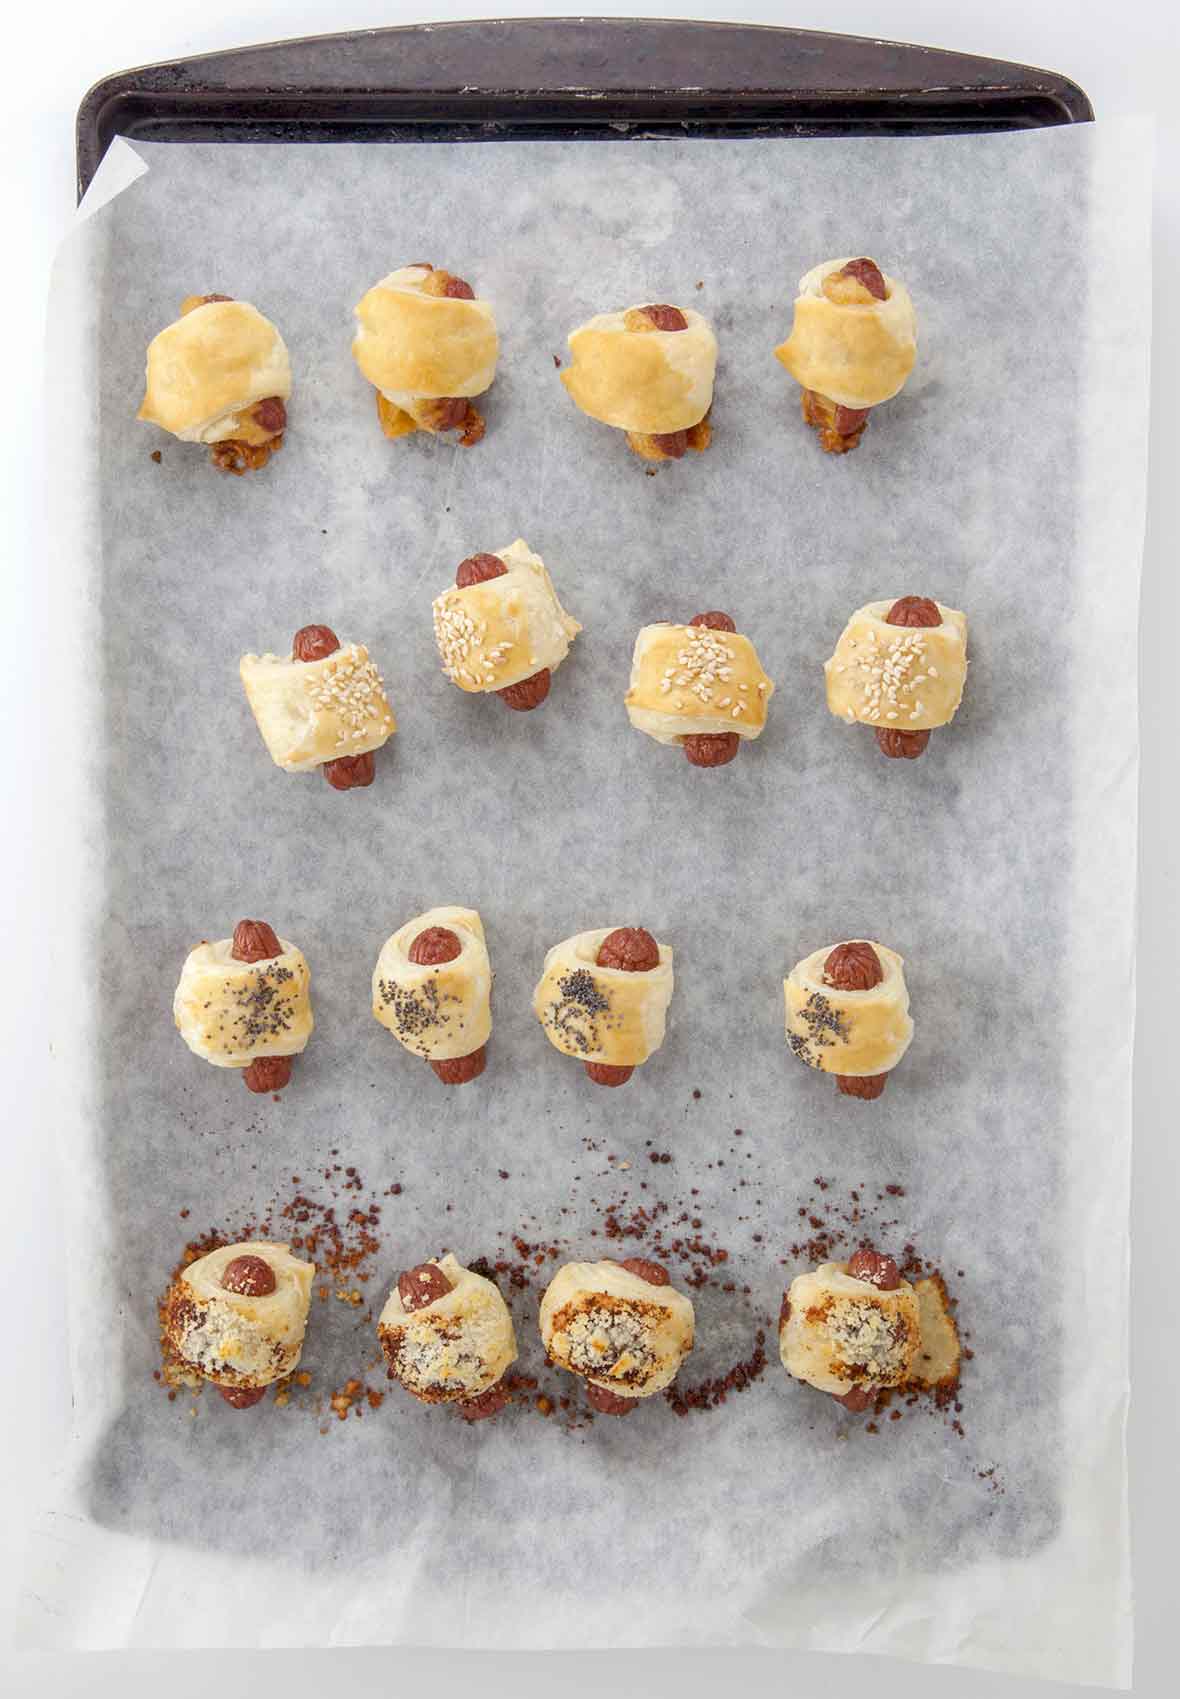 17 mini hot dogs wrapped in puff pastry on a parchment lined baking sheet